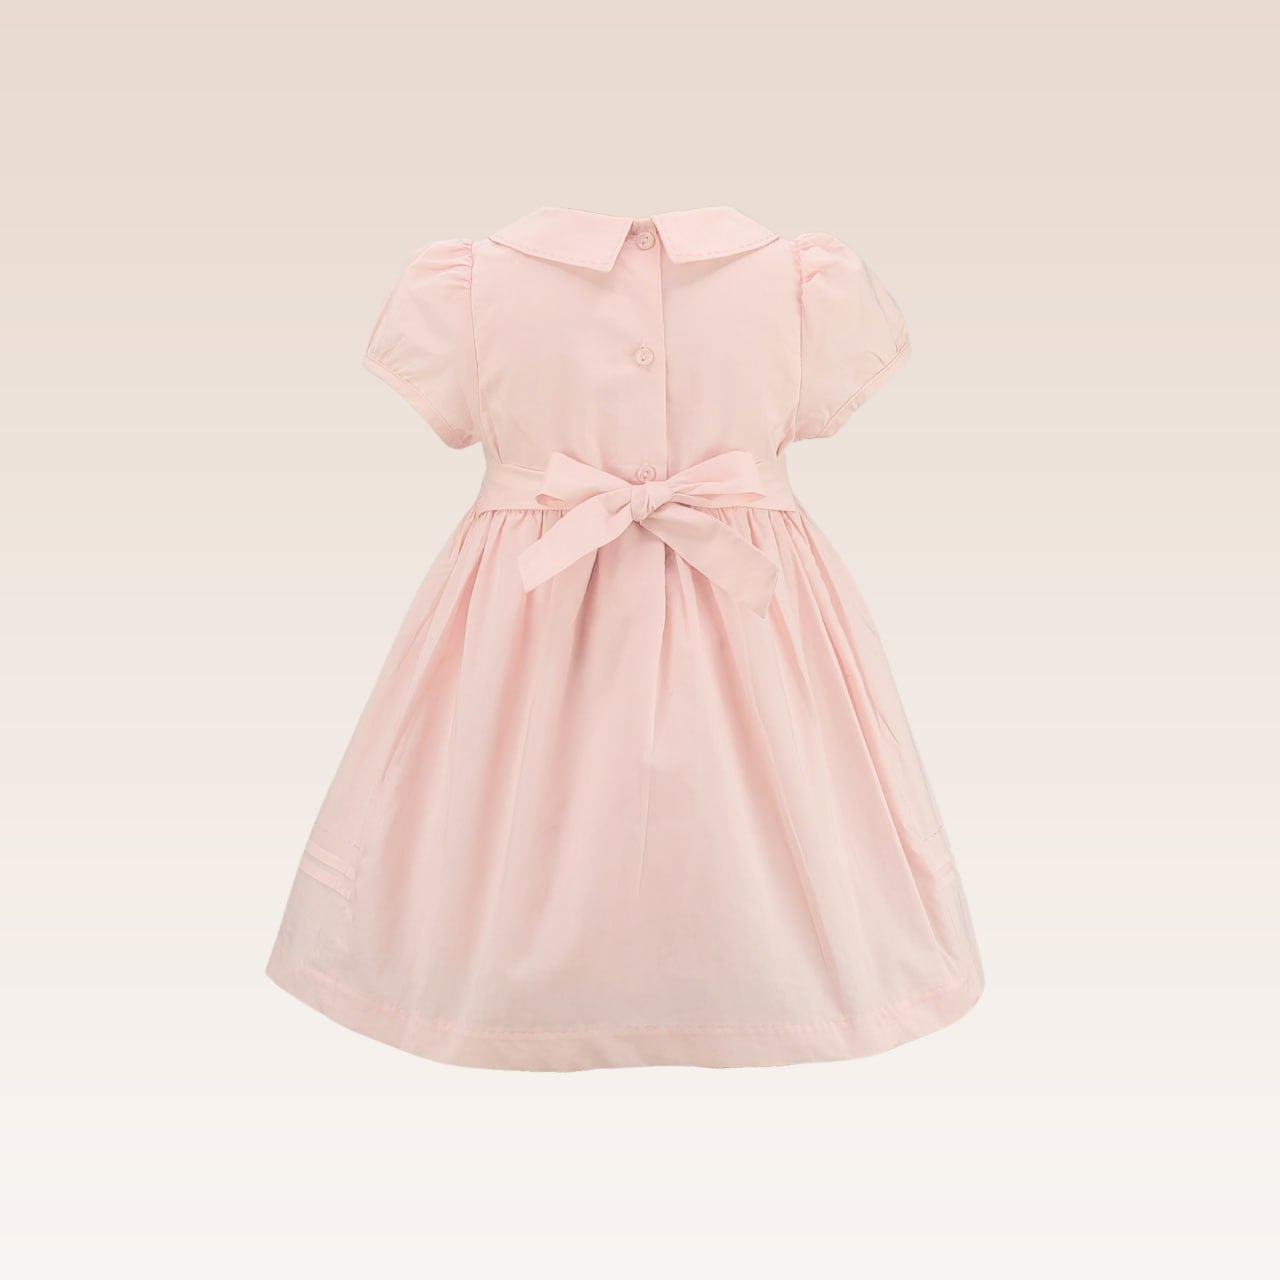 Hazel Baby Girls Dress Rose with Smock and Embroidery details